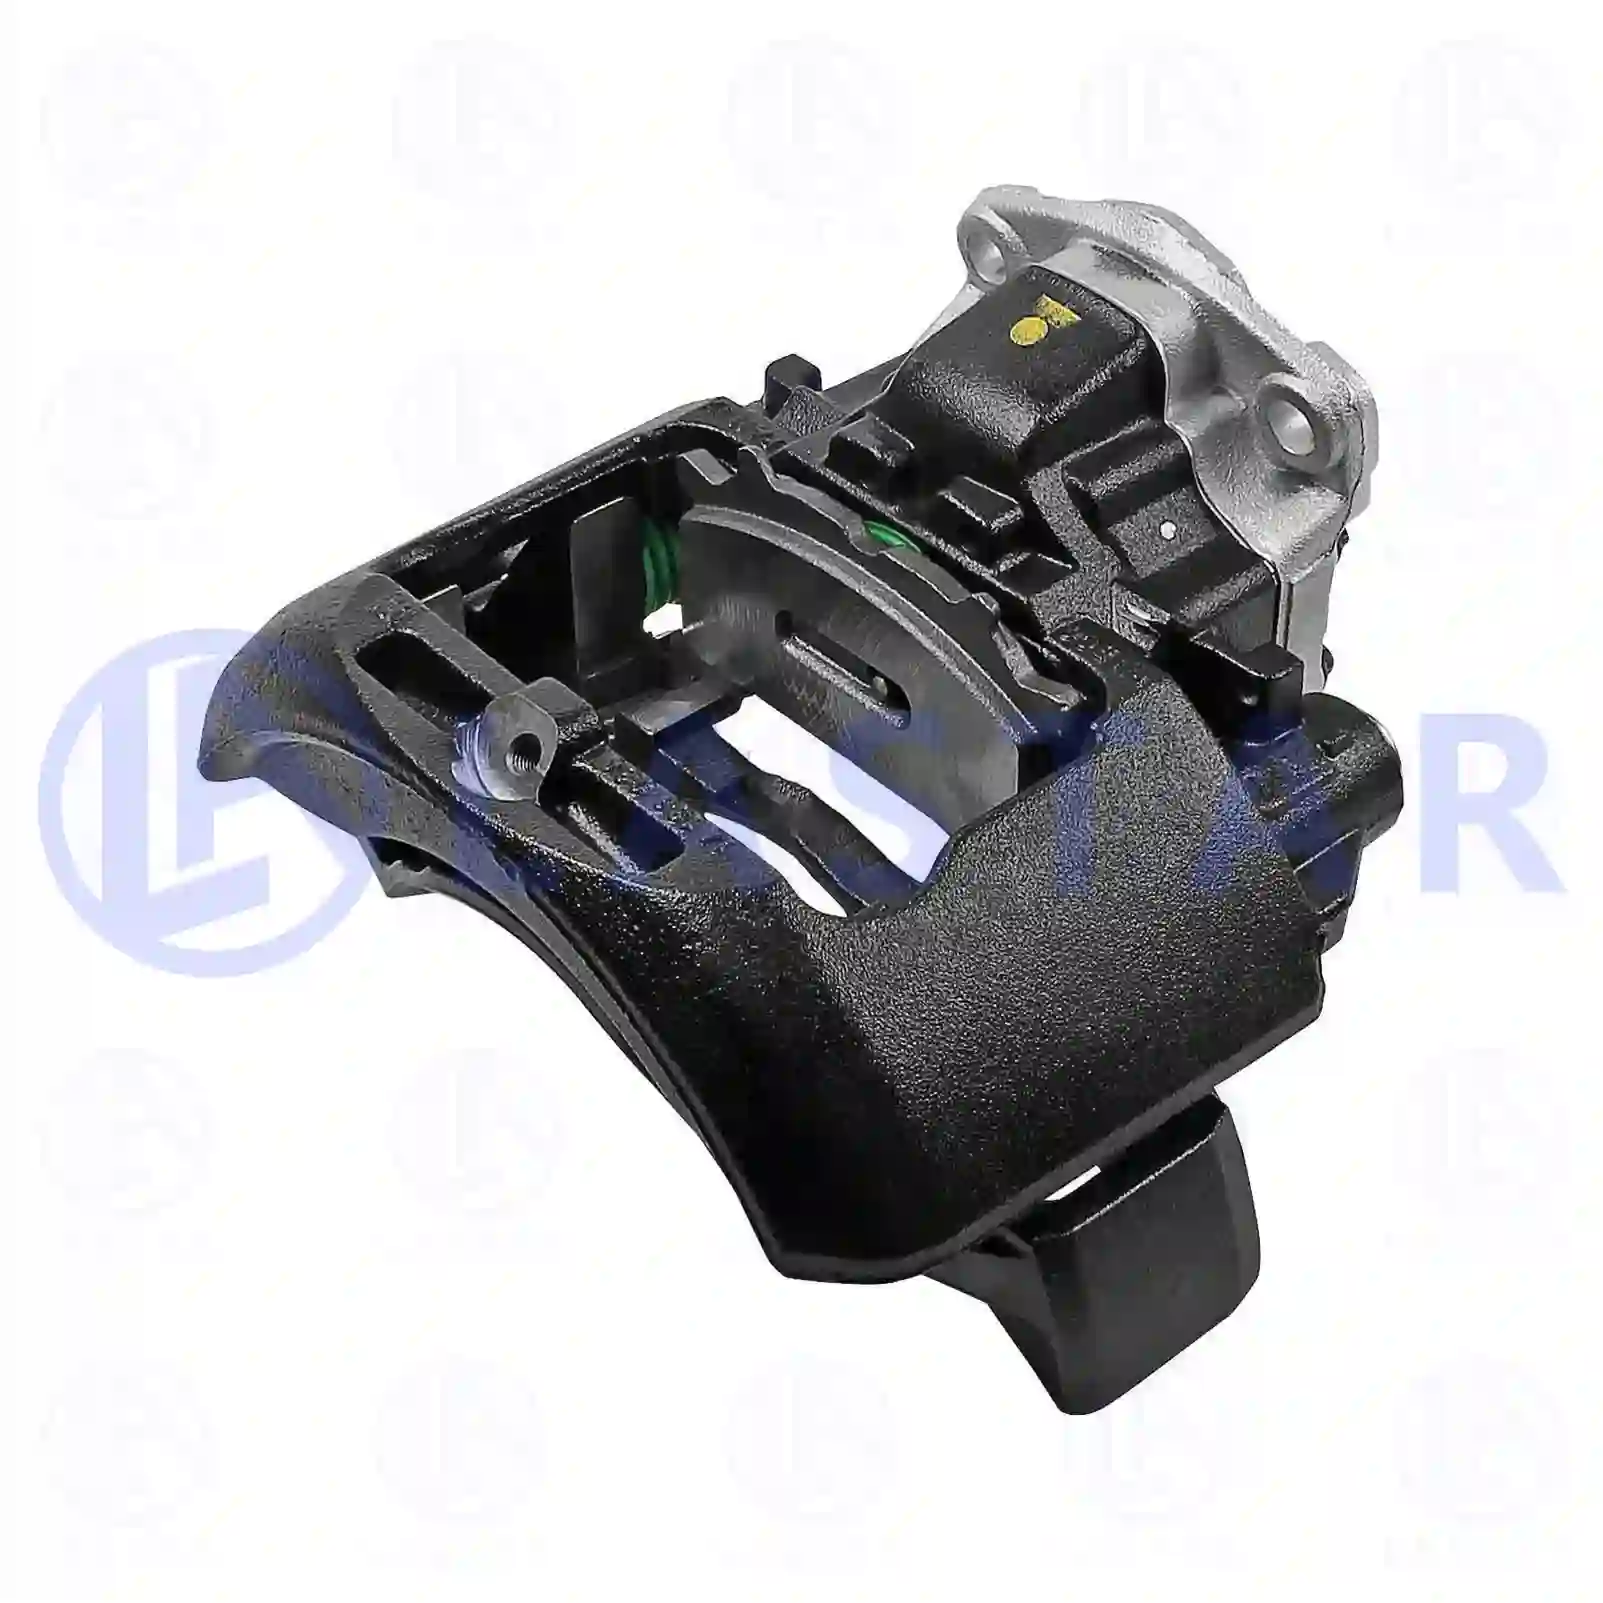 Brake caliper, right, reman. / without old core, 77717355, 1505373, 82586840, 81508046070, 81508046088, 81508046354, 81508049070, 81508049088 ||  77717355 Lastar Spare Part | Truck Spare Parts, Auotomotive Spare Parts Brake caliper, right, reman. / without old core, 77717355, 1505373, 82586840, 81508046070, 81508046088, 81508046354, 81508049070, 81508049088 ||  77717355 Lastar Spare Part | Truck Spare Parts, Auotomotive Spare Parts